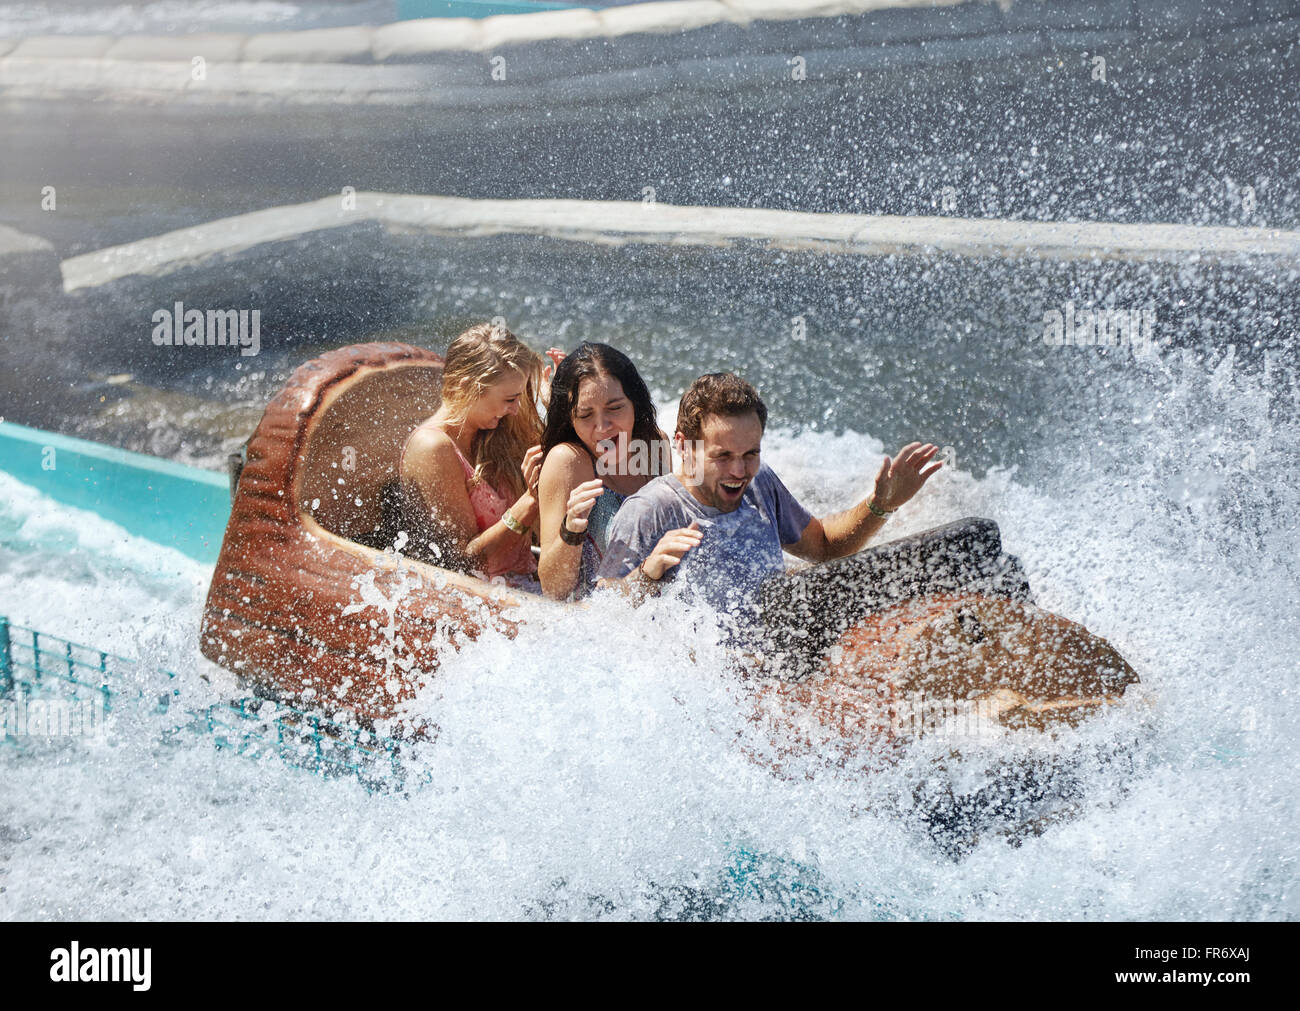 Friends getting splashed in water log amusement park ride Stock Photo